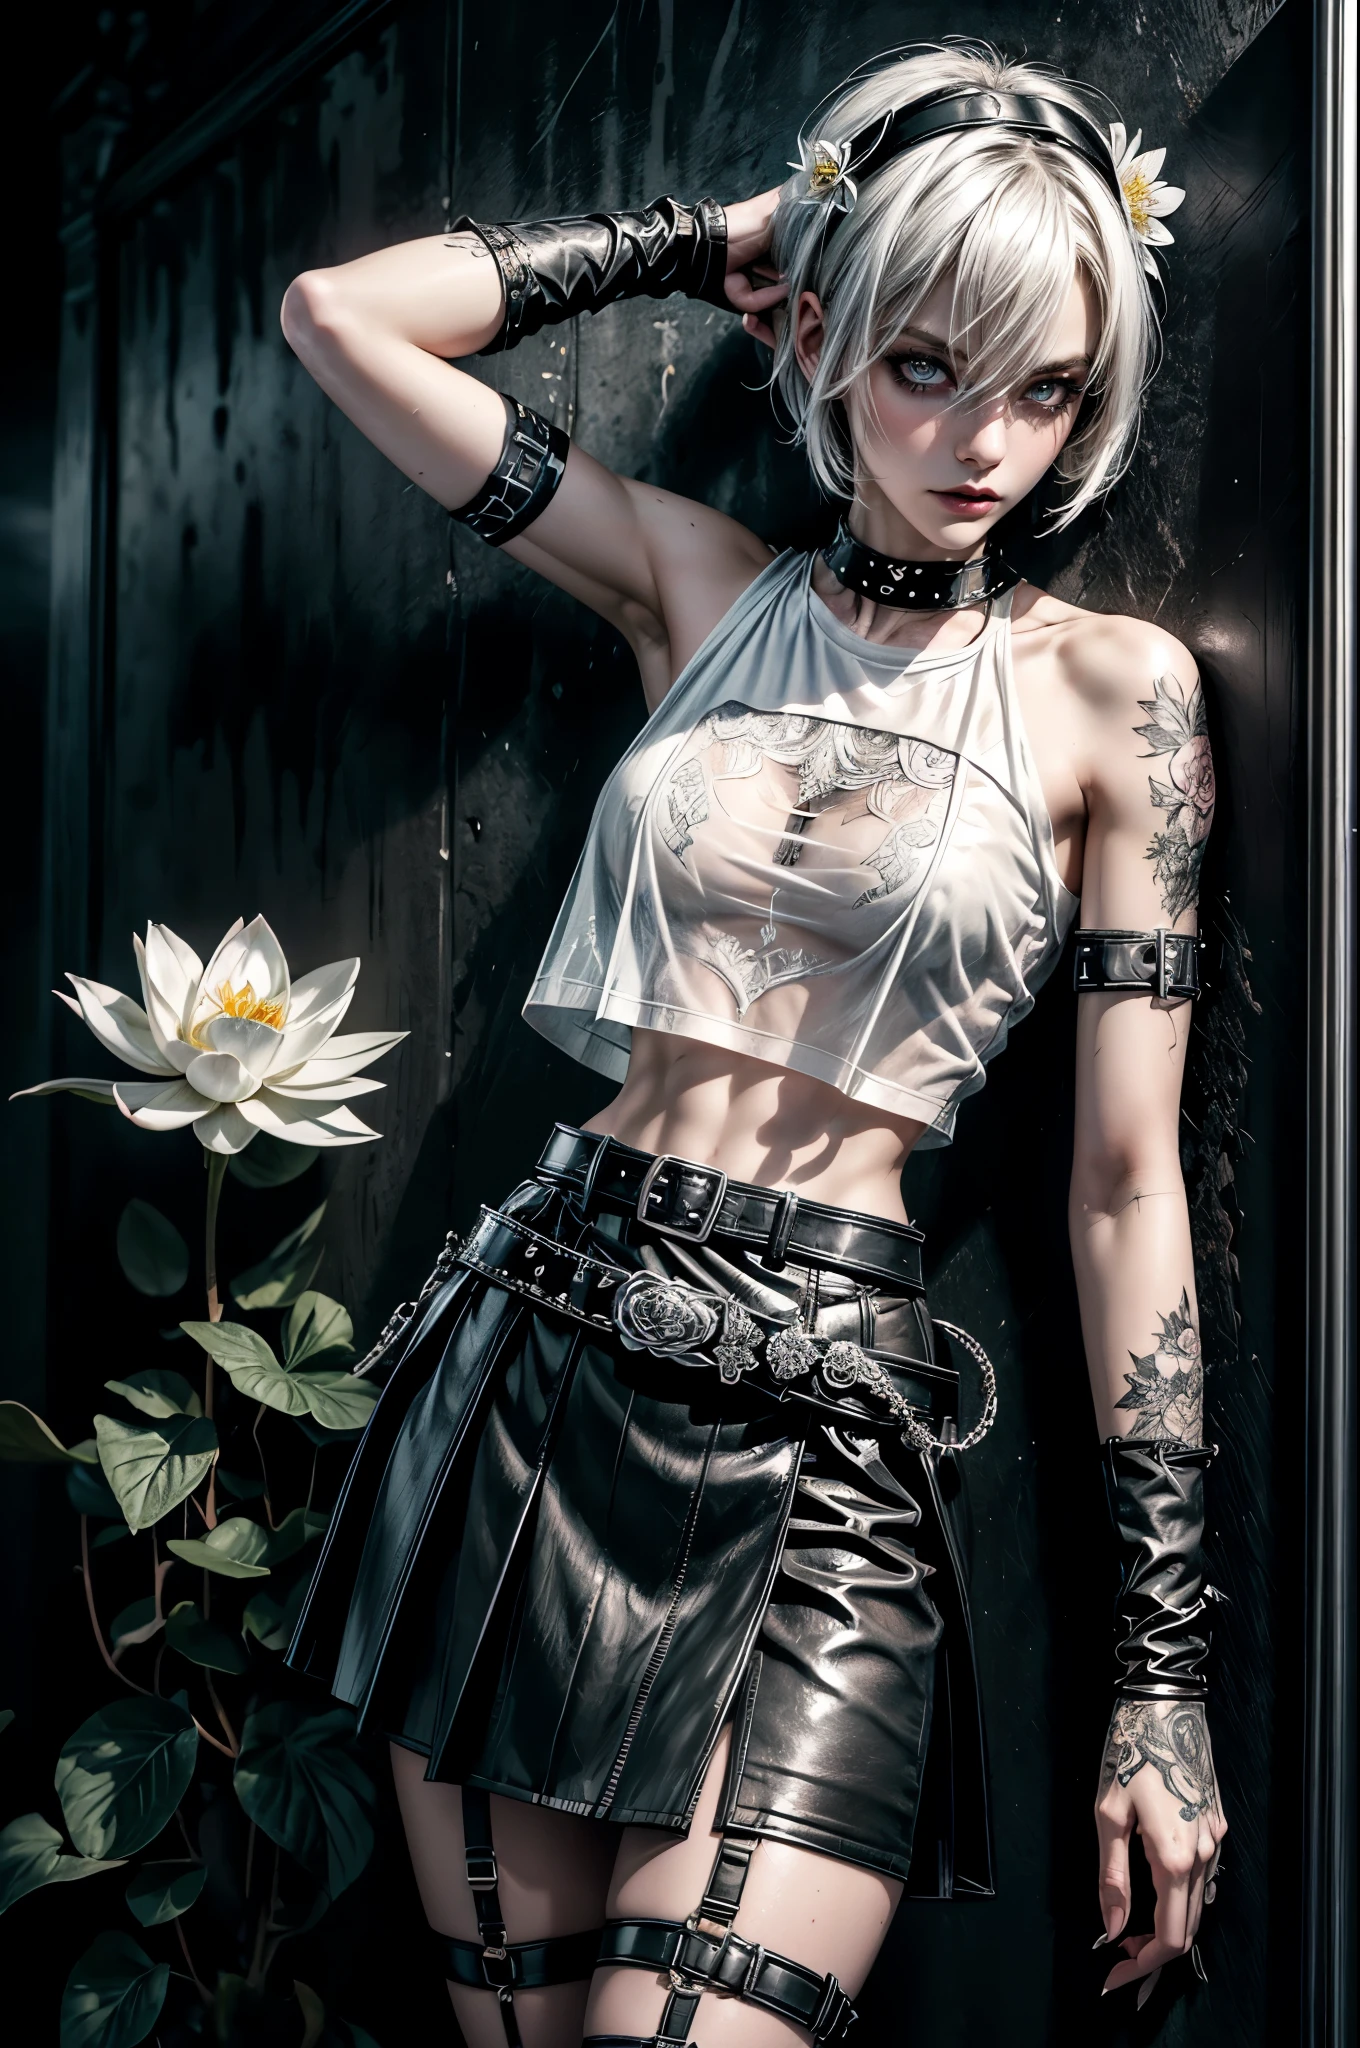 (Detailed illustrations, Very detailed and detailed drawing, Delicate lines with slow and rapid, Realistic texture expression), One woman with very short white hair with black tips, ( emo hairstyle, ), goth, pale white skin, evil smirk, (girls bedroom background), dark lighting, cold atmosphere, lore_Emma , pink eyes , dark eyeliner, (ultra dark glossy black lipstick), bored expression, gorgeous face , super cute, 18 years old , hyper detailed face, (super skinny figure , medium breast, thin waist), back leaning against wall, slim legs, slim hips, LowriseXL, (ultra low rise wet look shiny leather skirt with transparent flower pattern), (mesh shirt with flower pattern under (white transparent loose t-shirt) with bare shoulders), black choker, vulva tattoo, black hairband, (white lotus flower in hair), ((flower pattern tattoo)), fingerless leather gloves, (black nail polish), faded tattoo's, ((thigh belt)), ((hip chains)), ((belt hanging on hip)), ((many studded belts)), (((right arm back against wall))), (((left hand behind head)))